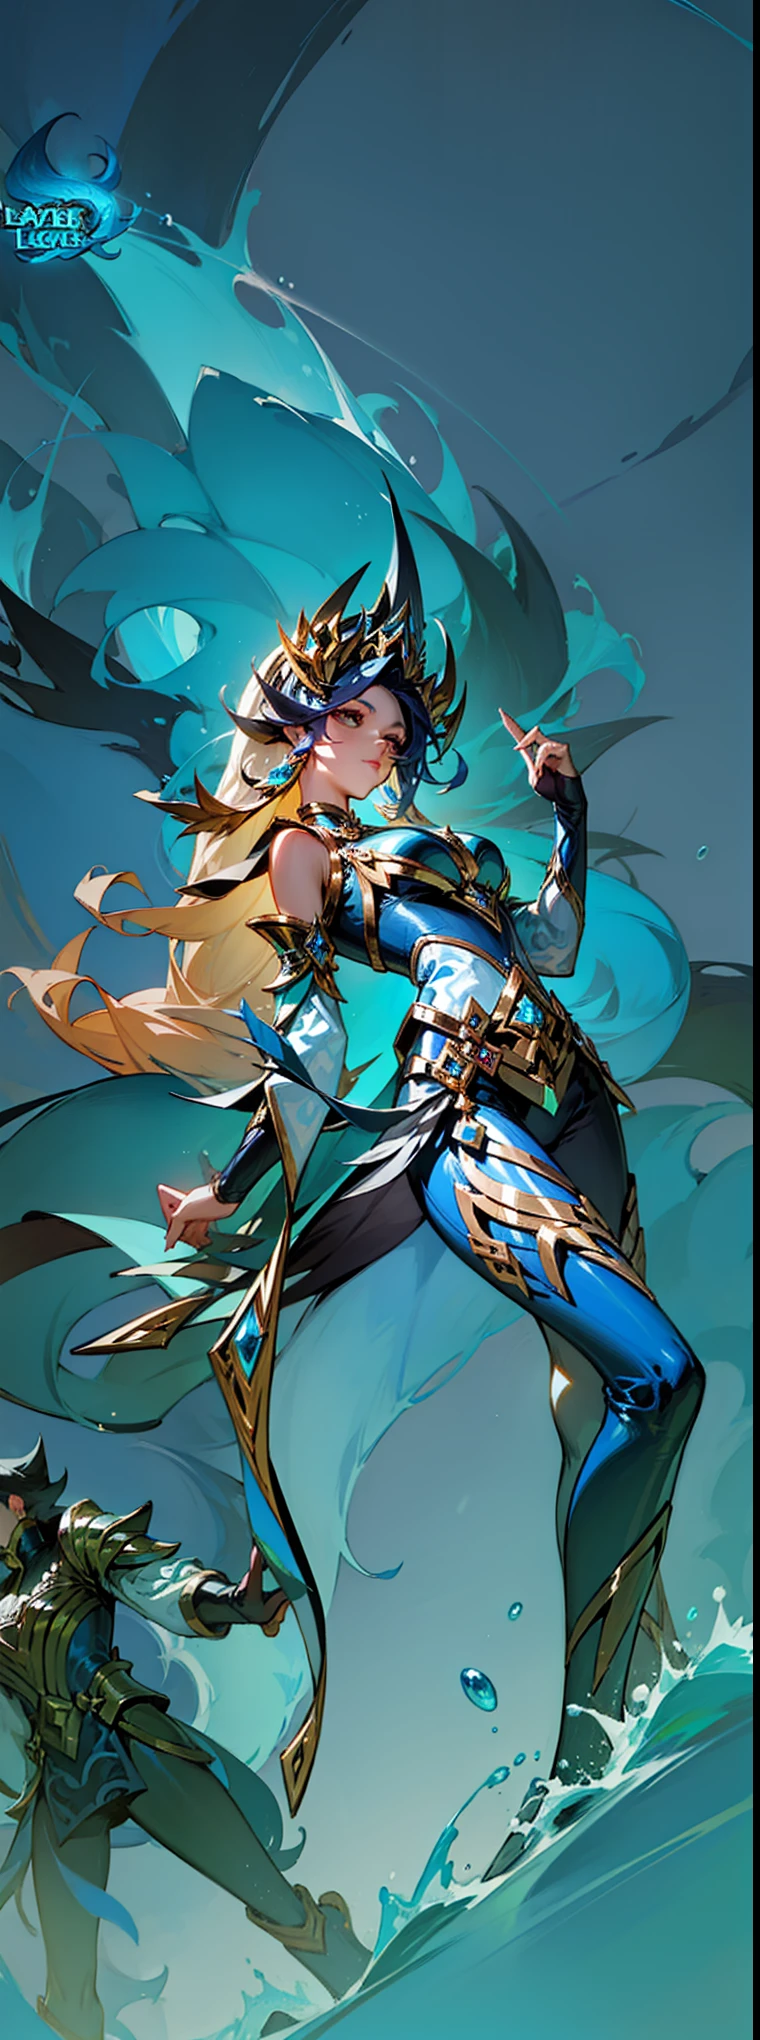 a female character, Queen of the Sea Mu Yanling, character splash art, League of Legends style, League of Legends art style, Wild Rift, Legends of Runeterra, mobile legends, g liulian art style, Official splash art,in the sea，huge wave，League of Legends art style, Official splash art, From League of Legends, League of Legends style art,Style ivan talavera and artgerm, fantasy art style, zanlatalia, character splash art，Blue atmosphere，cool color，Equipment is clear，Clearly portrayed，Outstanding quality